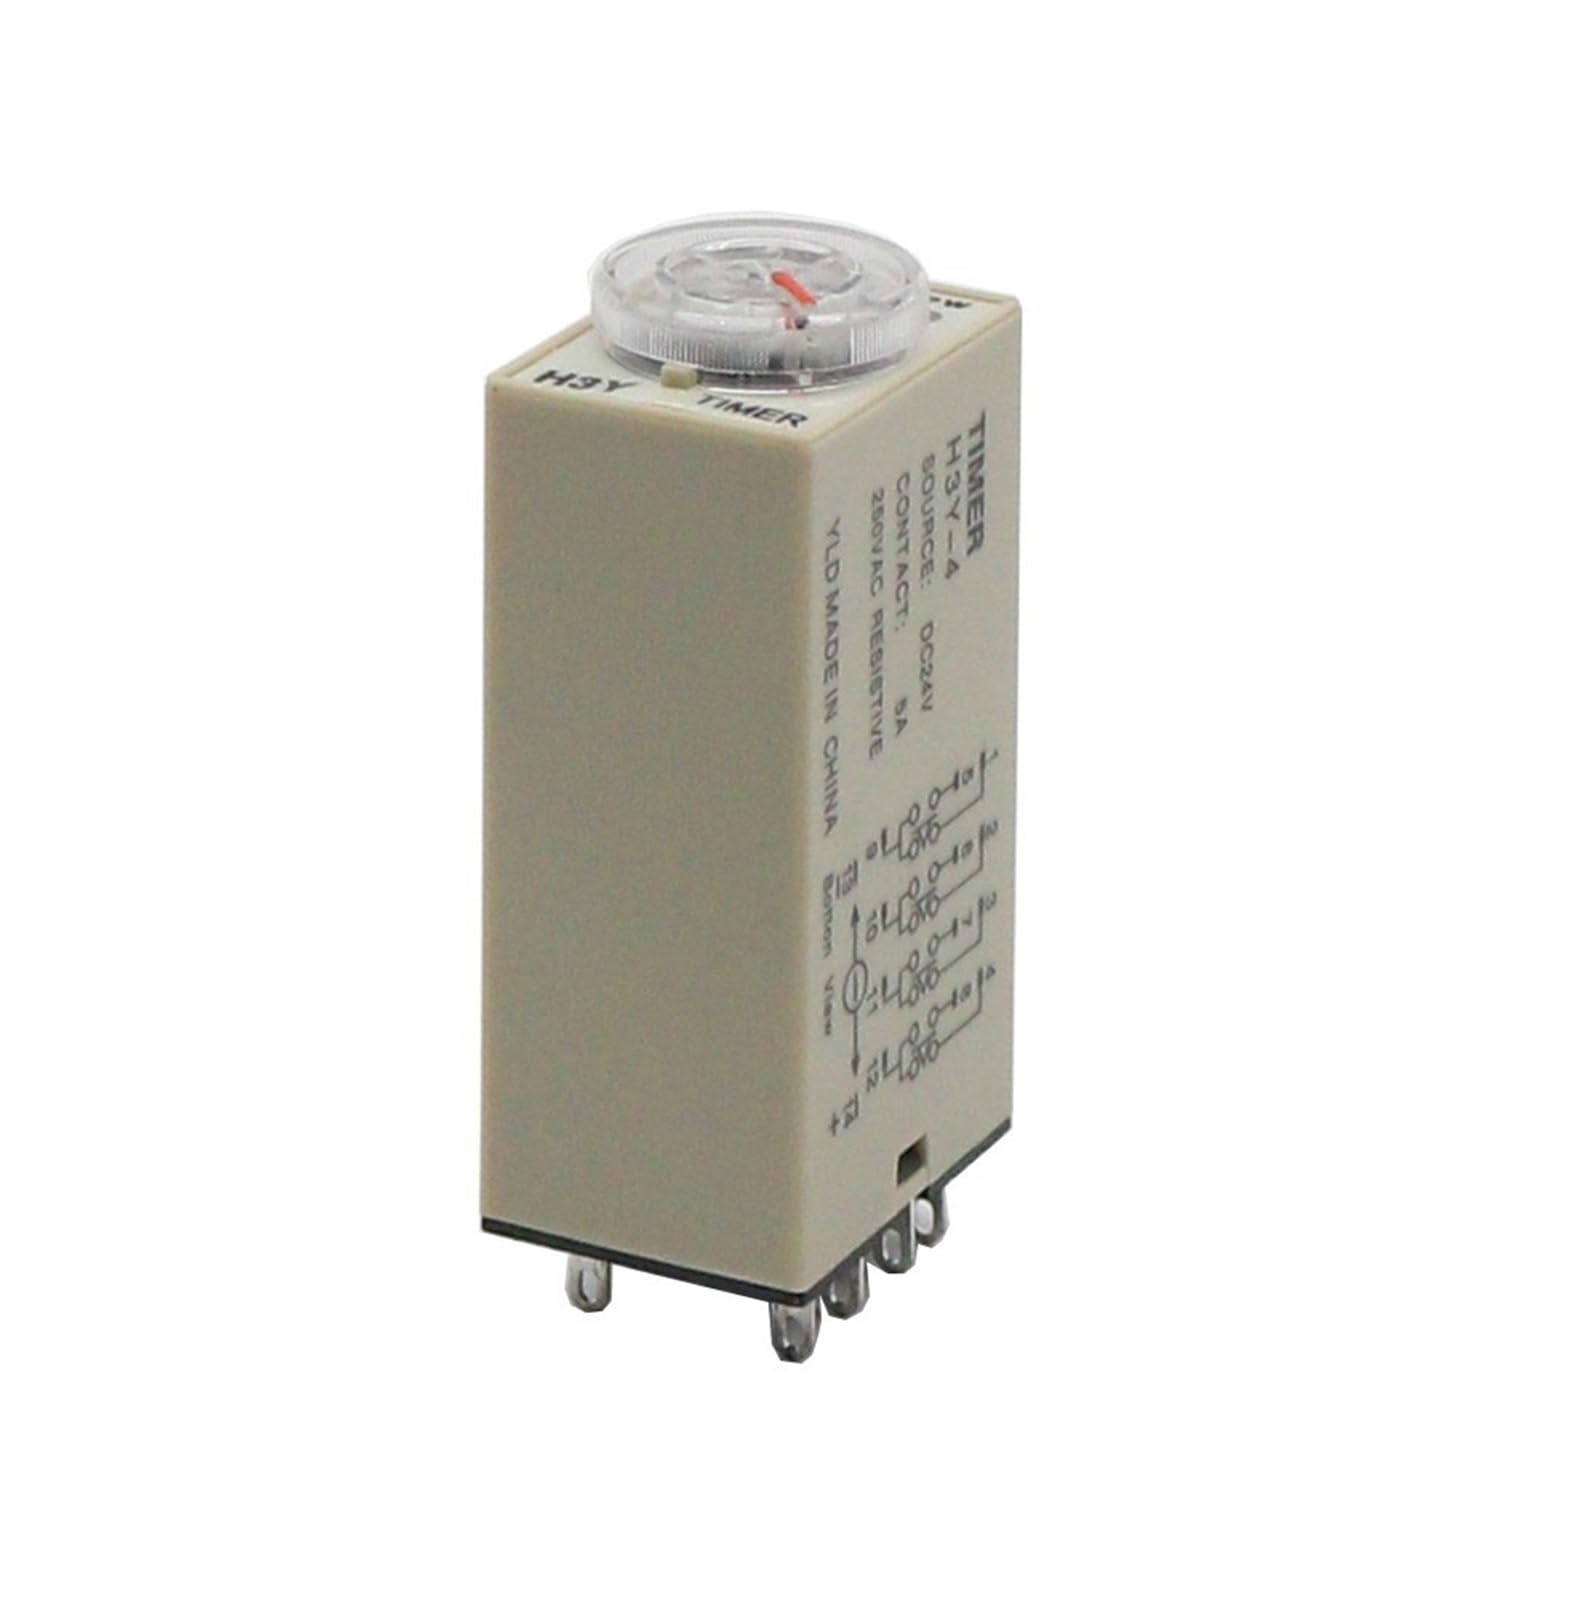 1pcs Power on Delay Time Relay H3Y-4 Small 14-pinDC12V24vAC220v Timer Switch 1S 3S 5S 30S 60S 5M 10M 30M 60M NWPNLXEA(DC 12V,H3Y-4 60Minute) von NWPNLXEA